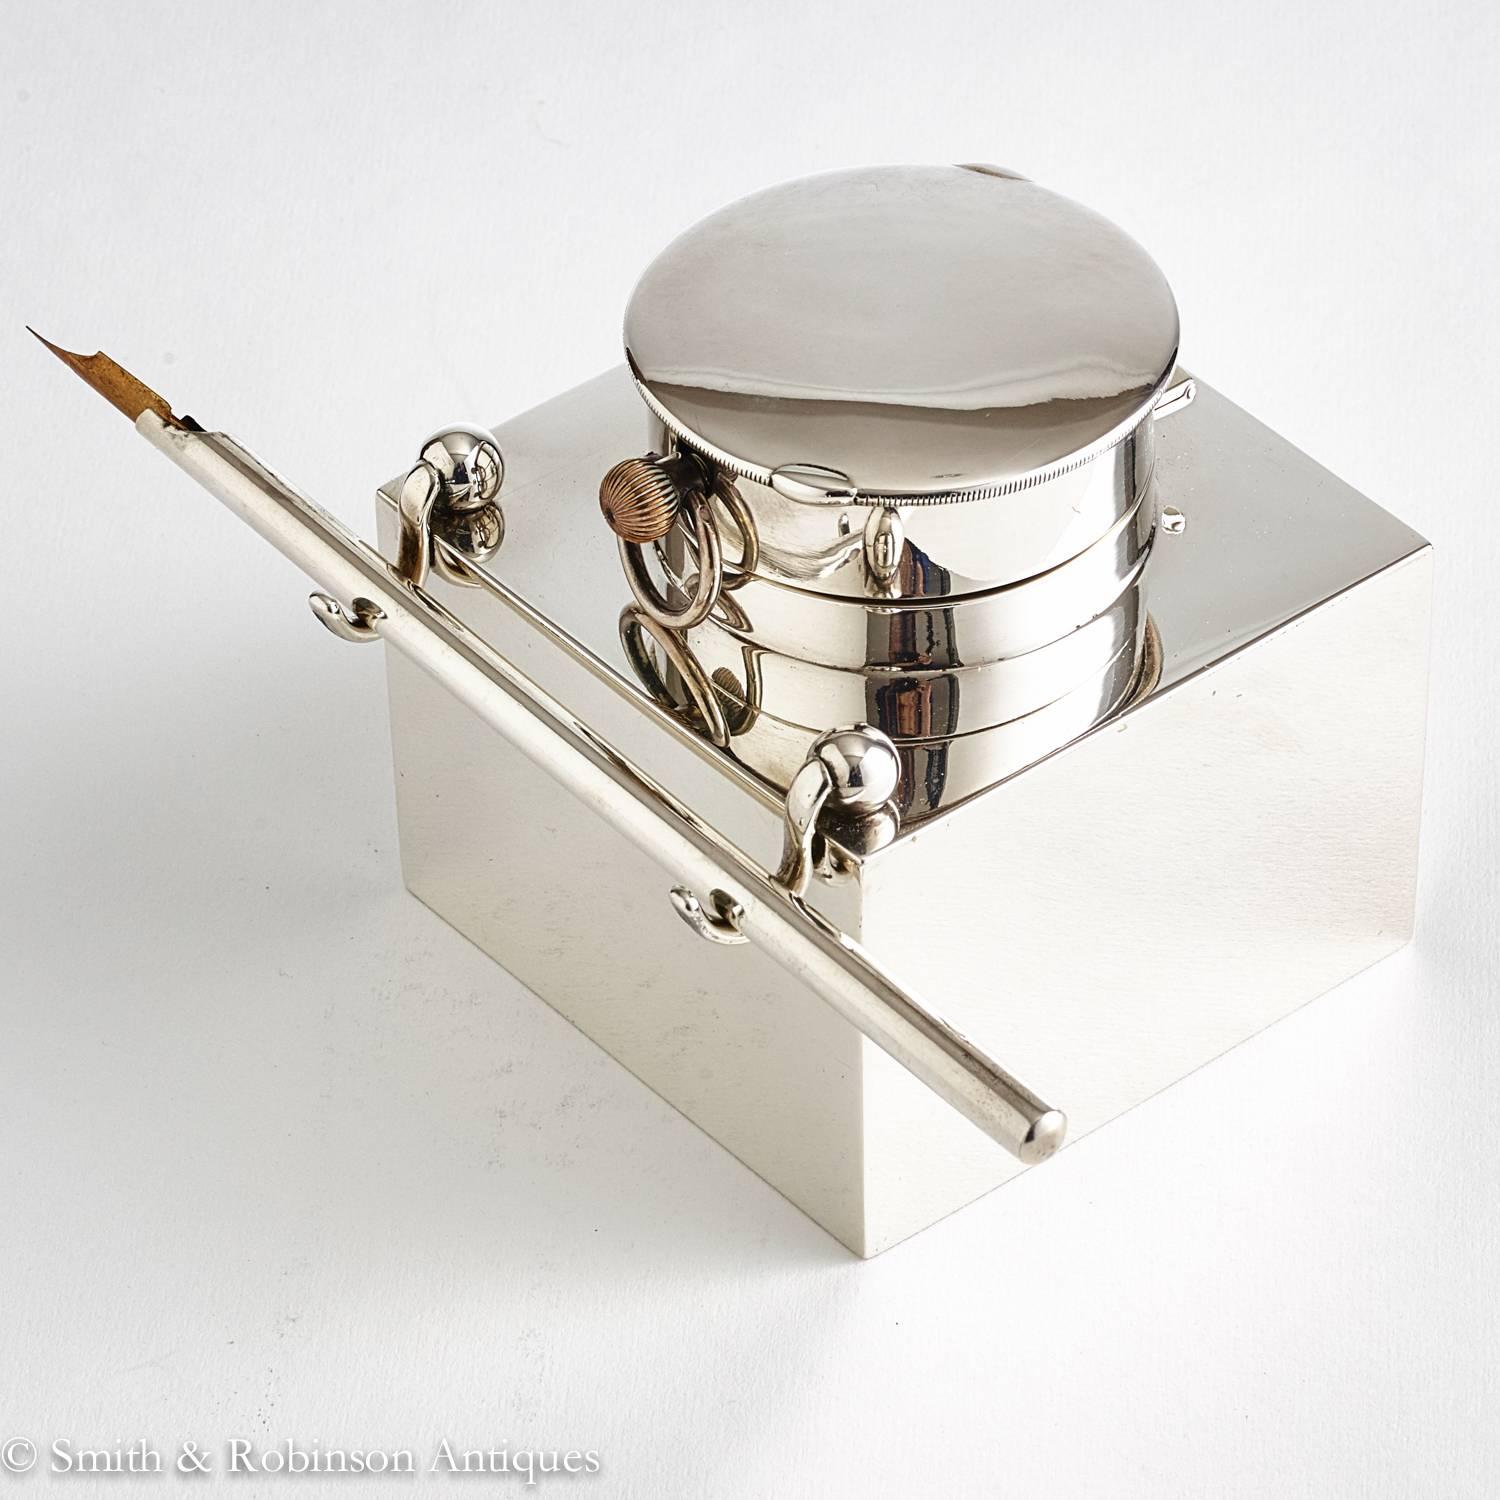 A fine quality novelty silver clock inkwell with pen and rest on front leading edge.

The interior has a cut-glass well which is held in position with two silver struts with inscribed details of the retailers, Goldsmith & Silversmith Company,